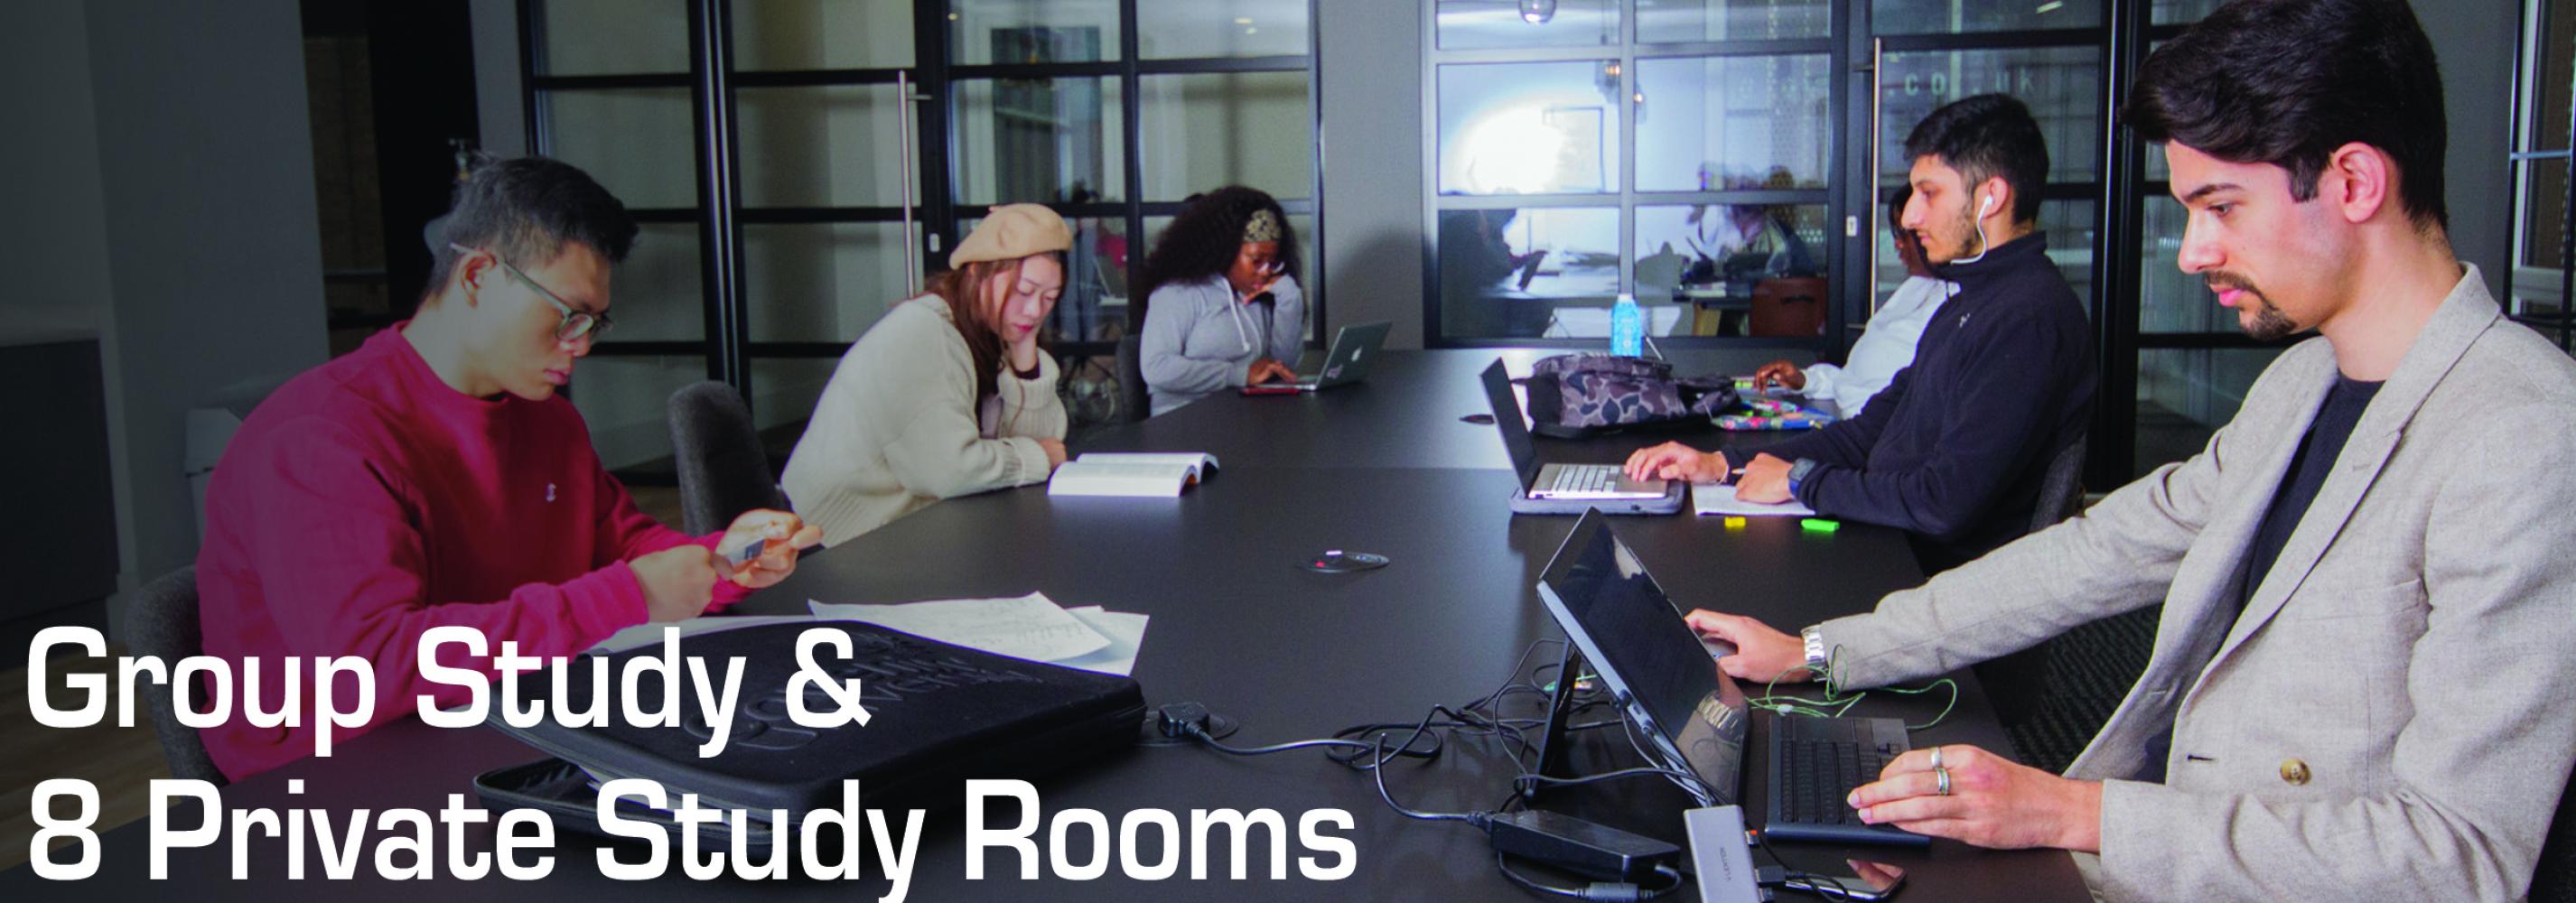 Study in one of our group spaces or 8 private study rooms